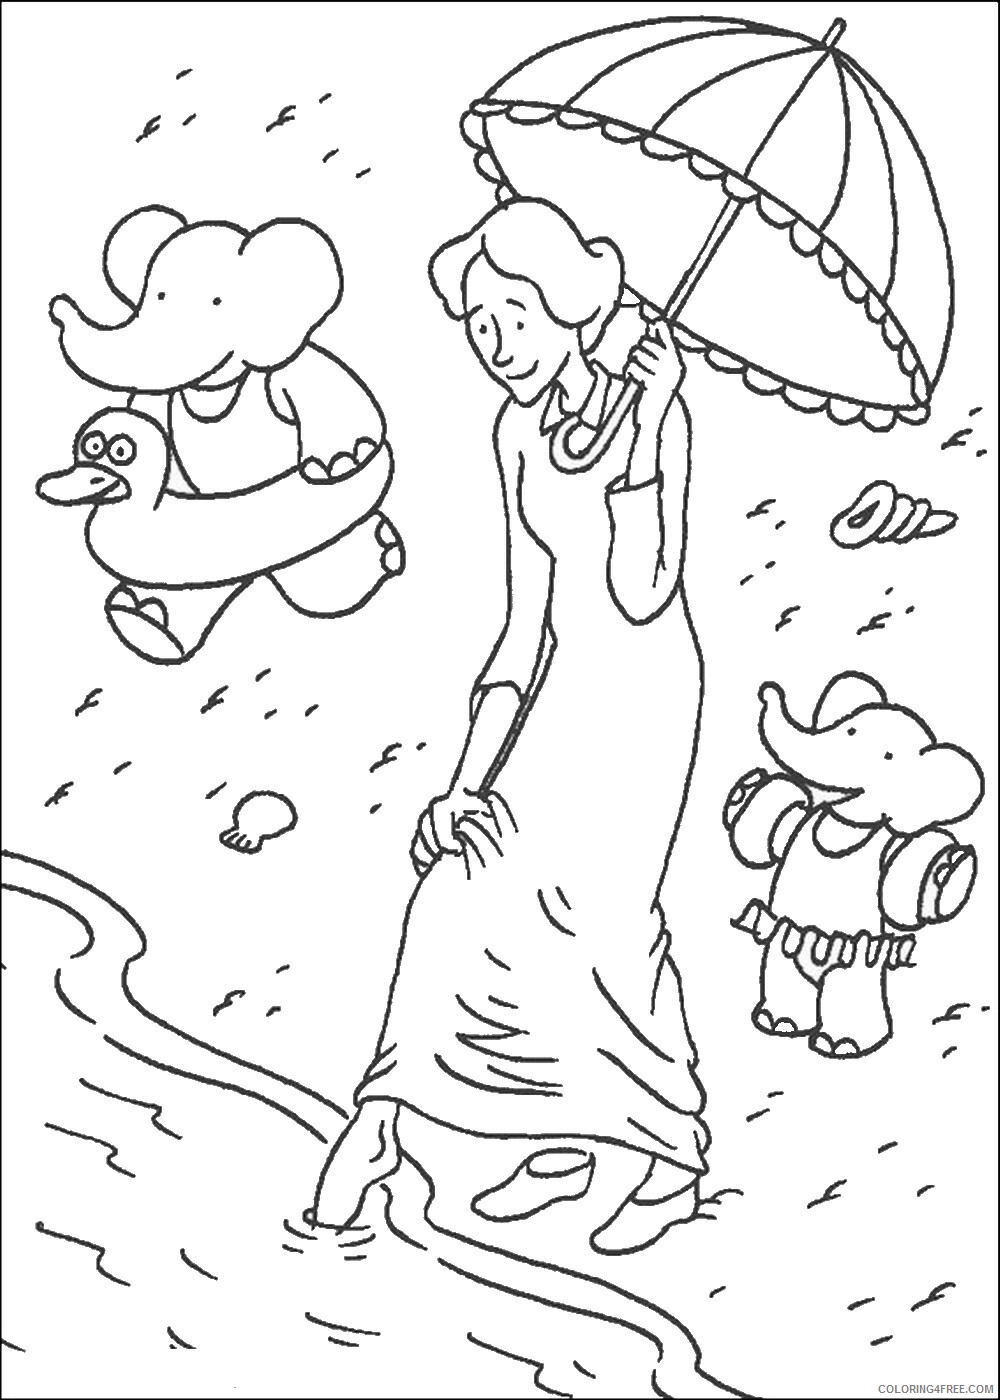 Babar Coloring Pages TV Film babar_cl_21 Printable 2020 00373 Coloring4free